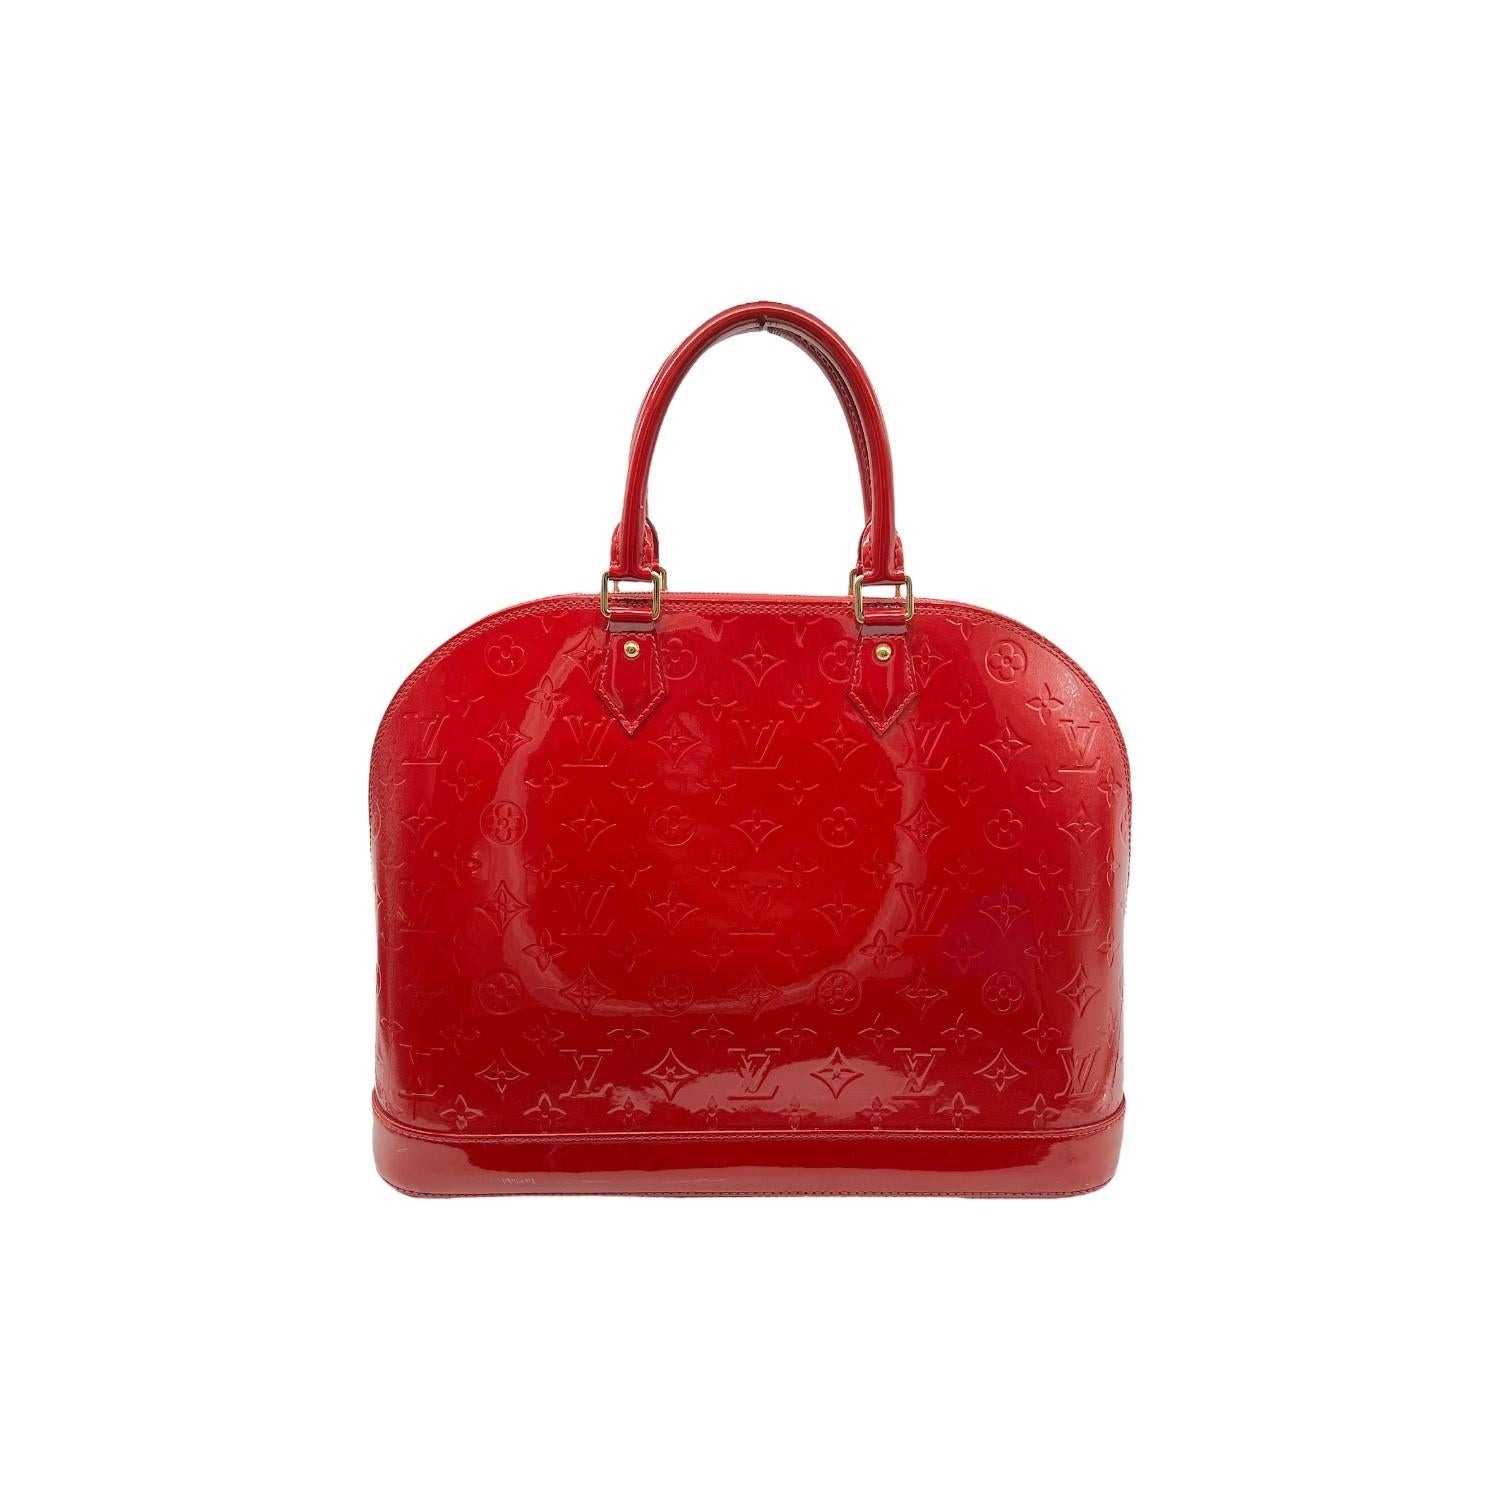 This Louis Vuitton Alma GM was made in the U.S.A. in 2013 and it is crafted of Louis Vuitton's red Monogram Vernis patent leather exterior with gold-tone hardware features. It has rolled leather top handles it features a gold-tone zipper top closure